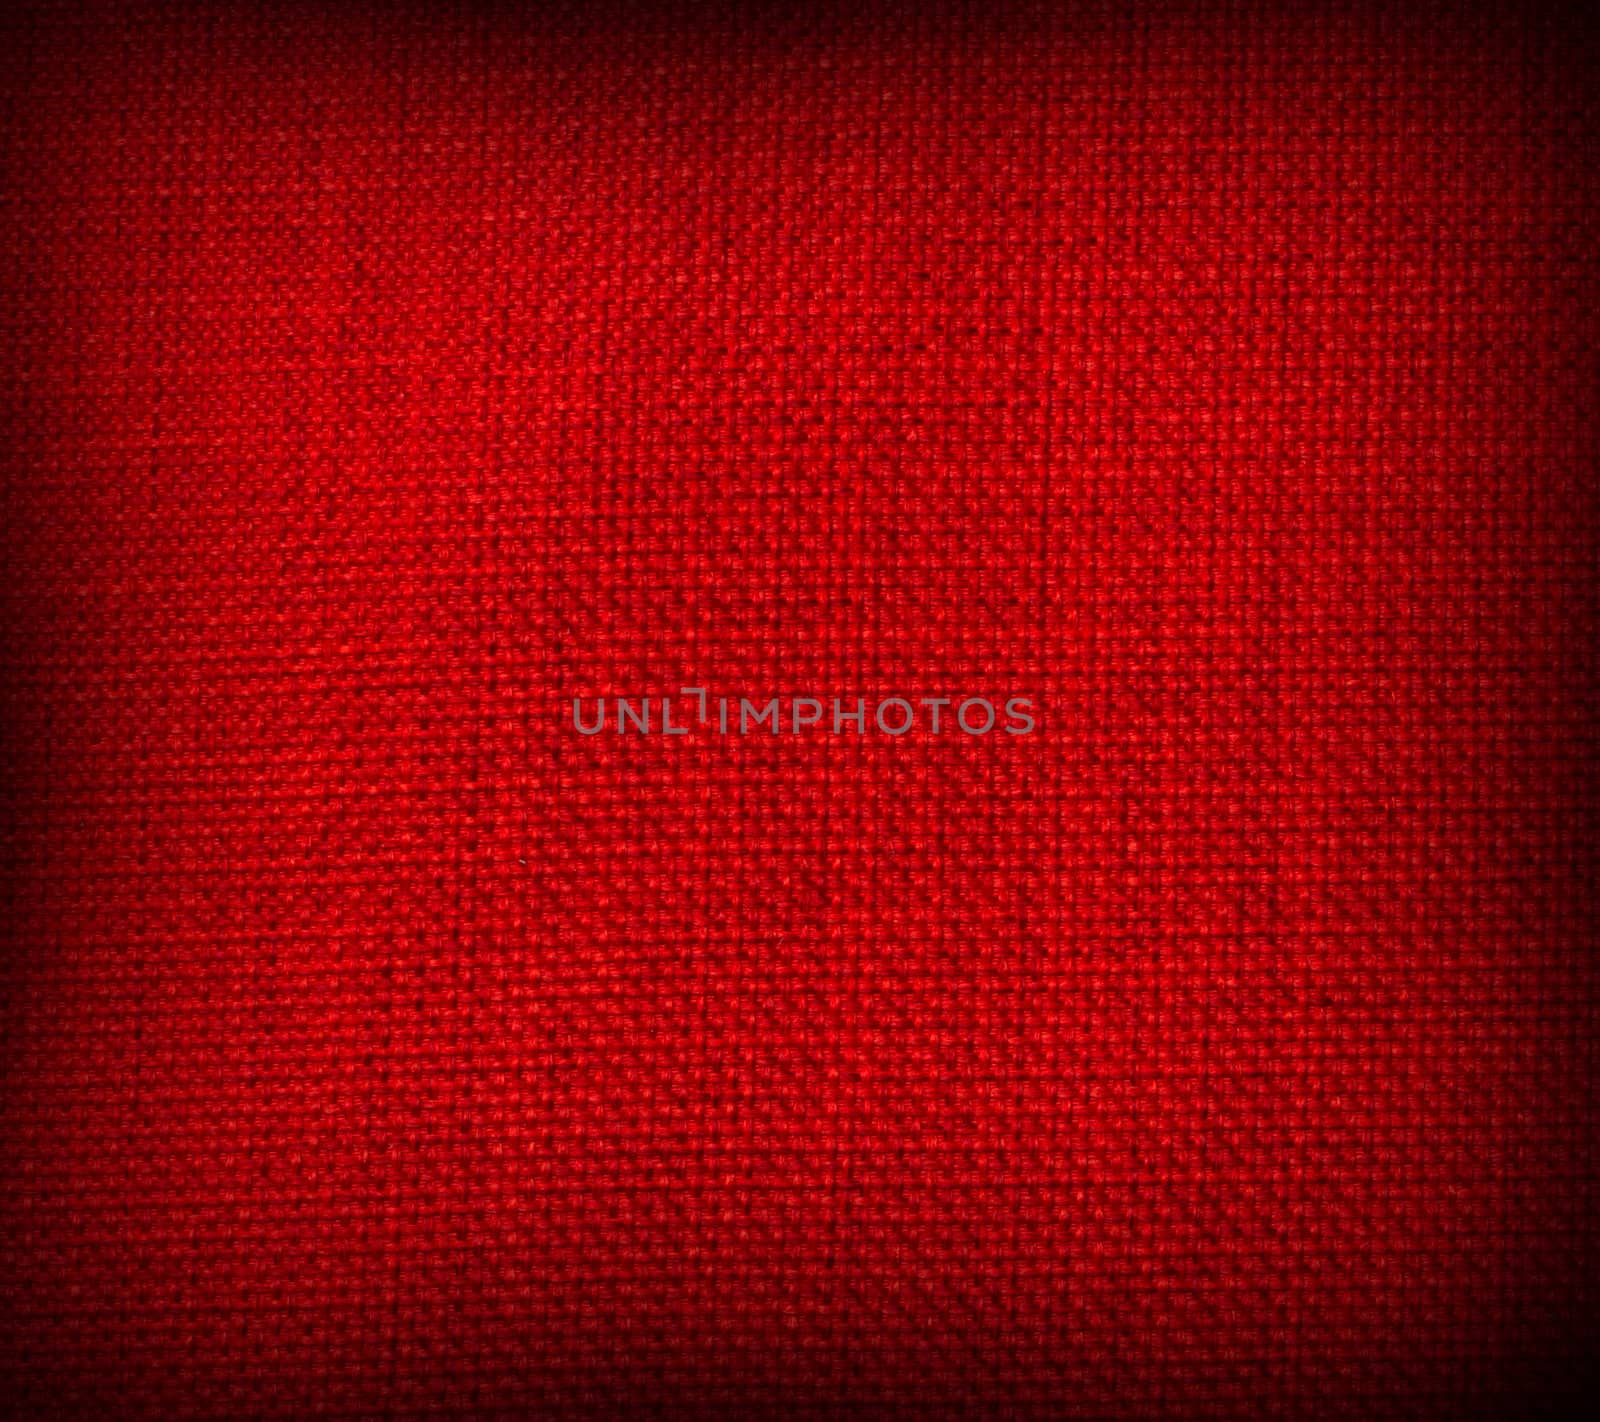 red background with a crisscross mesh pattern by lsantilli